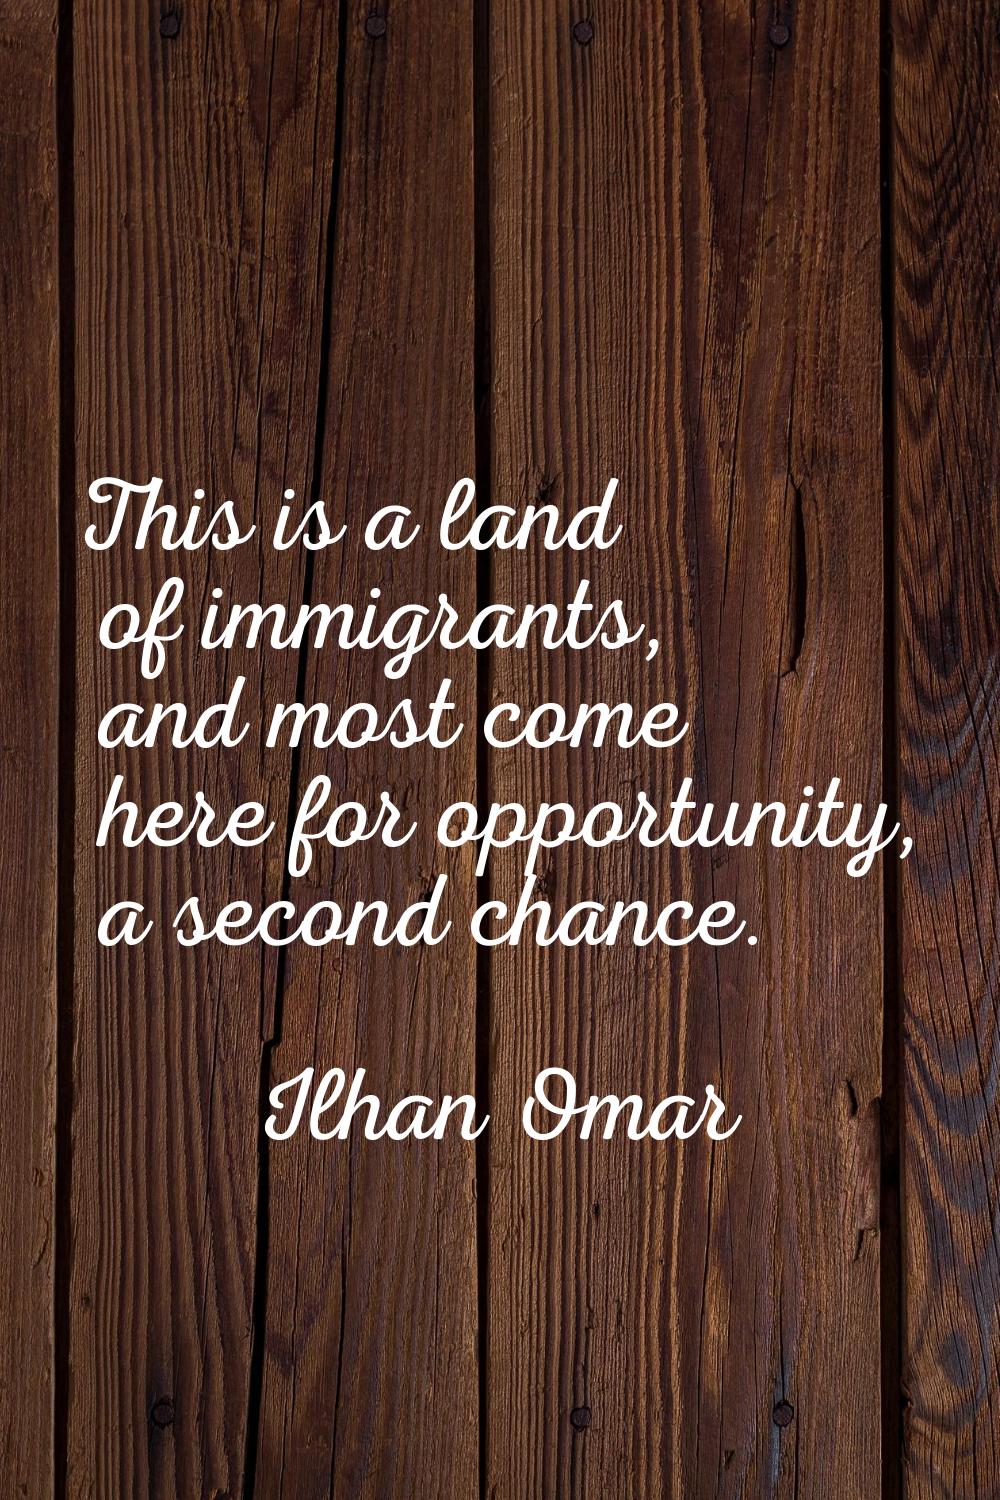 This is a land of immigrants, and most come here for opportunity, a second chance.